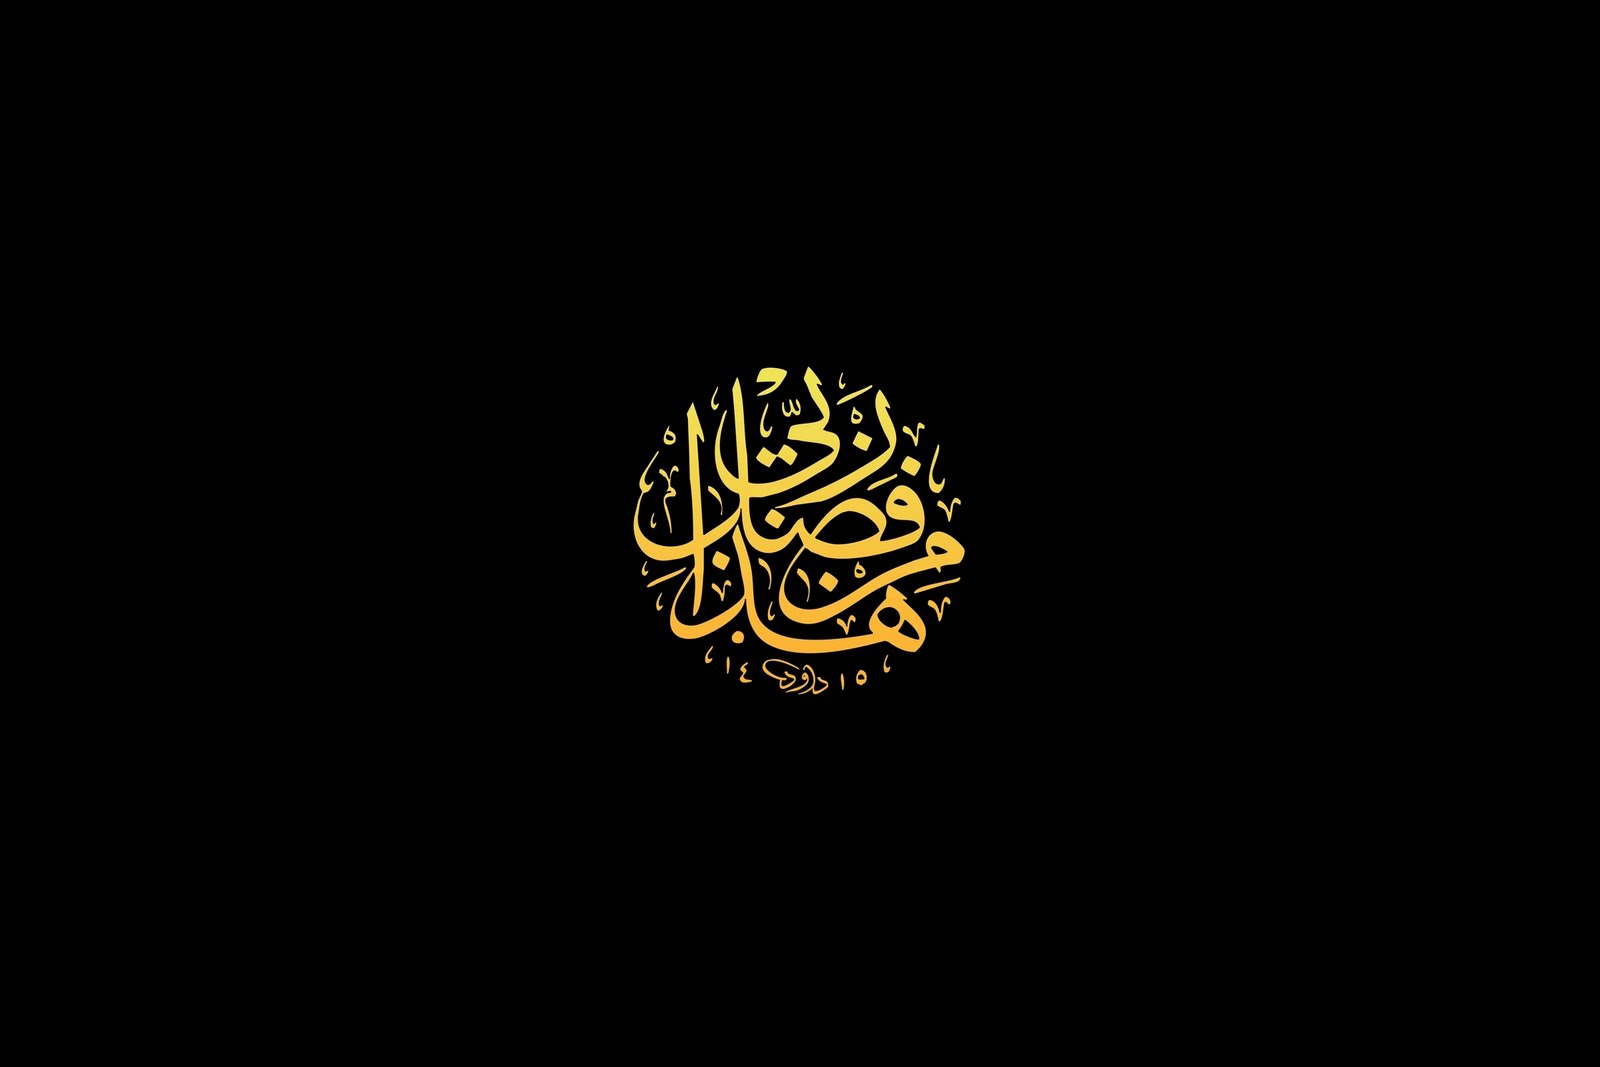 ISLAM THE PERFECT RELIGION Best Islamic Calligraphy Wallpapers Free